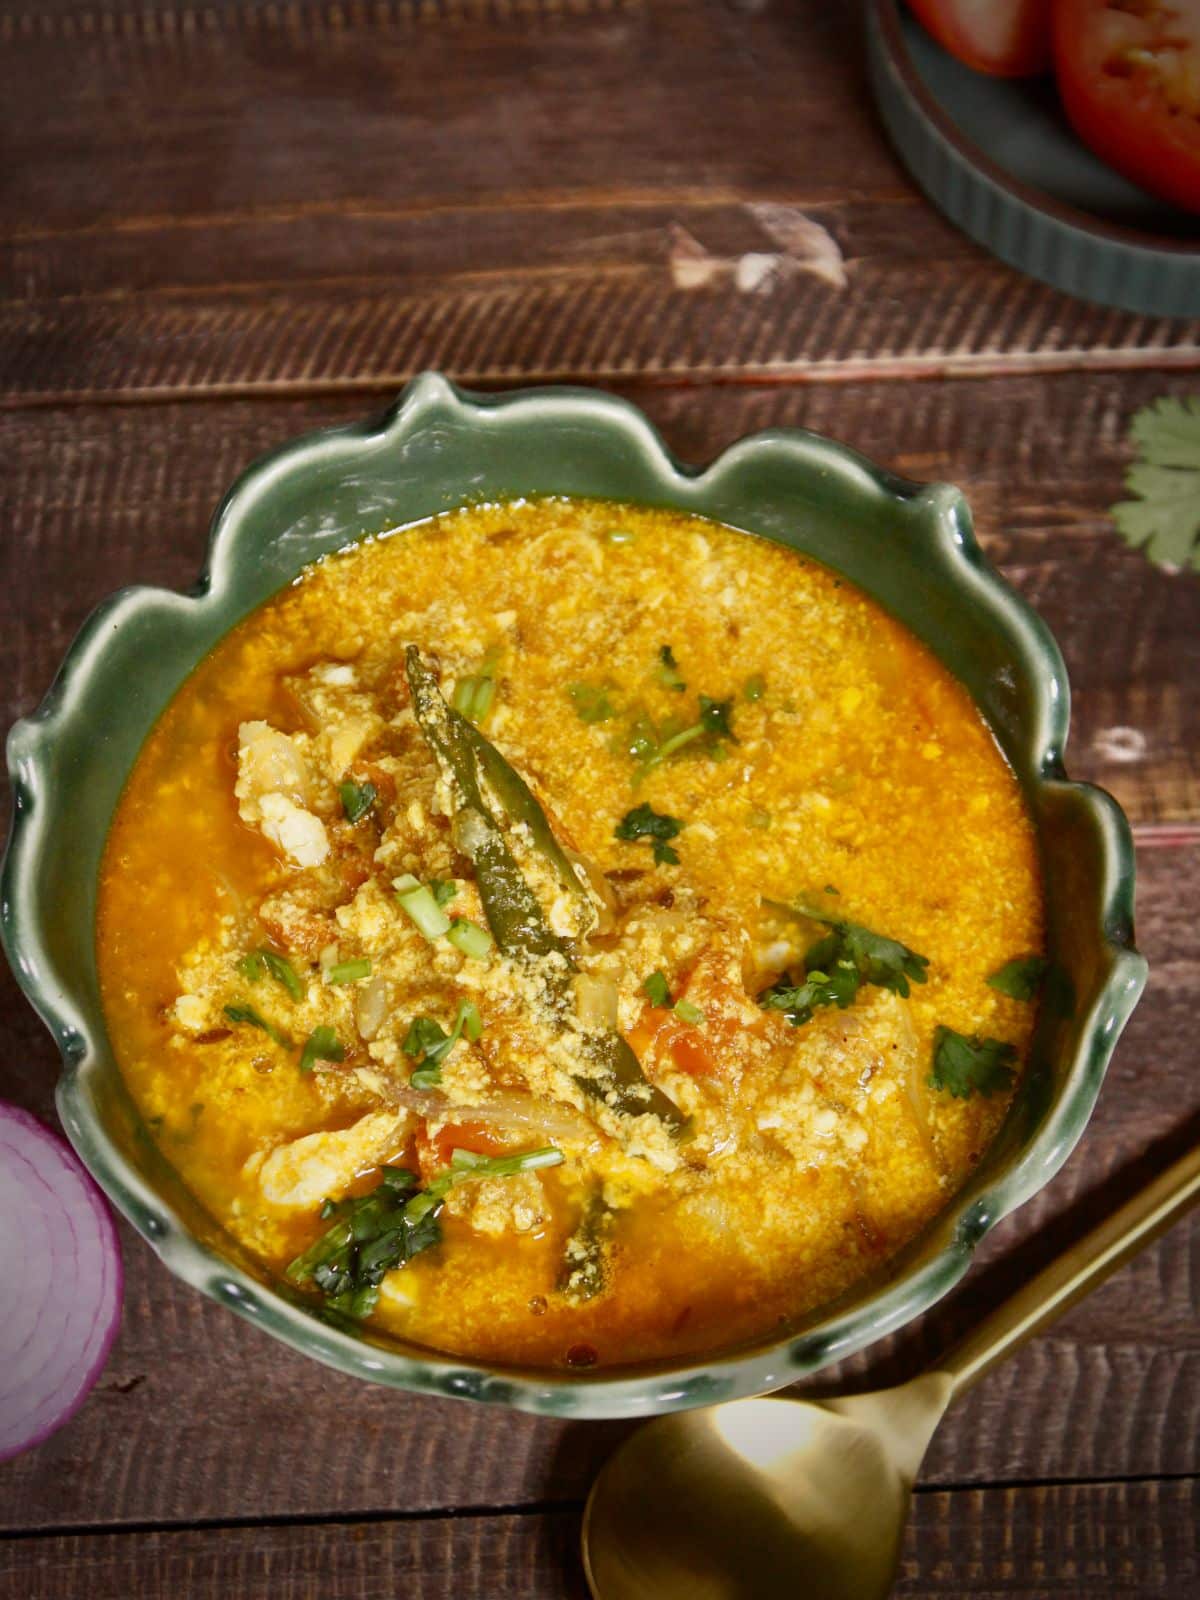 Top view of Assamese style tomato egg curry